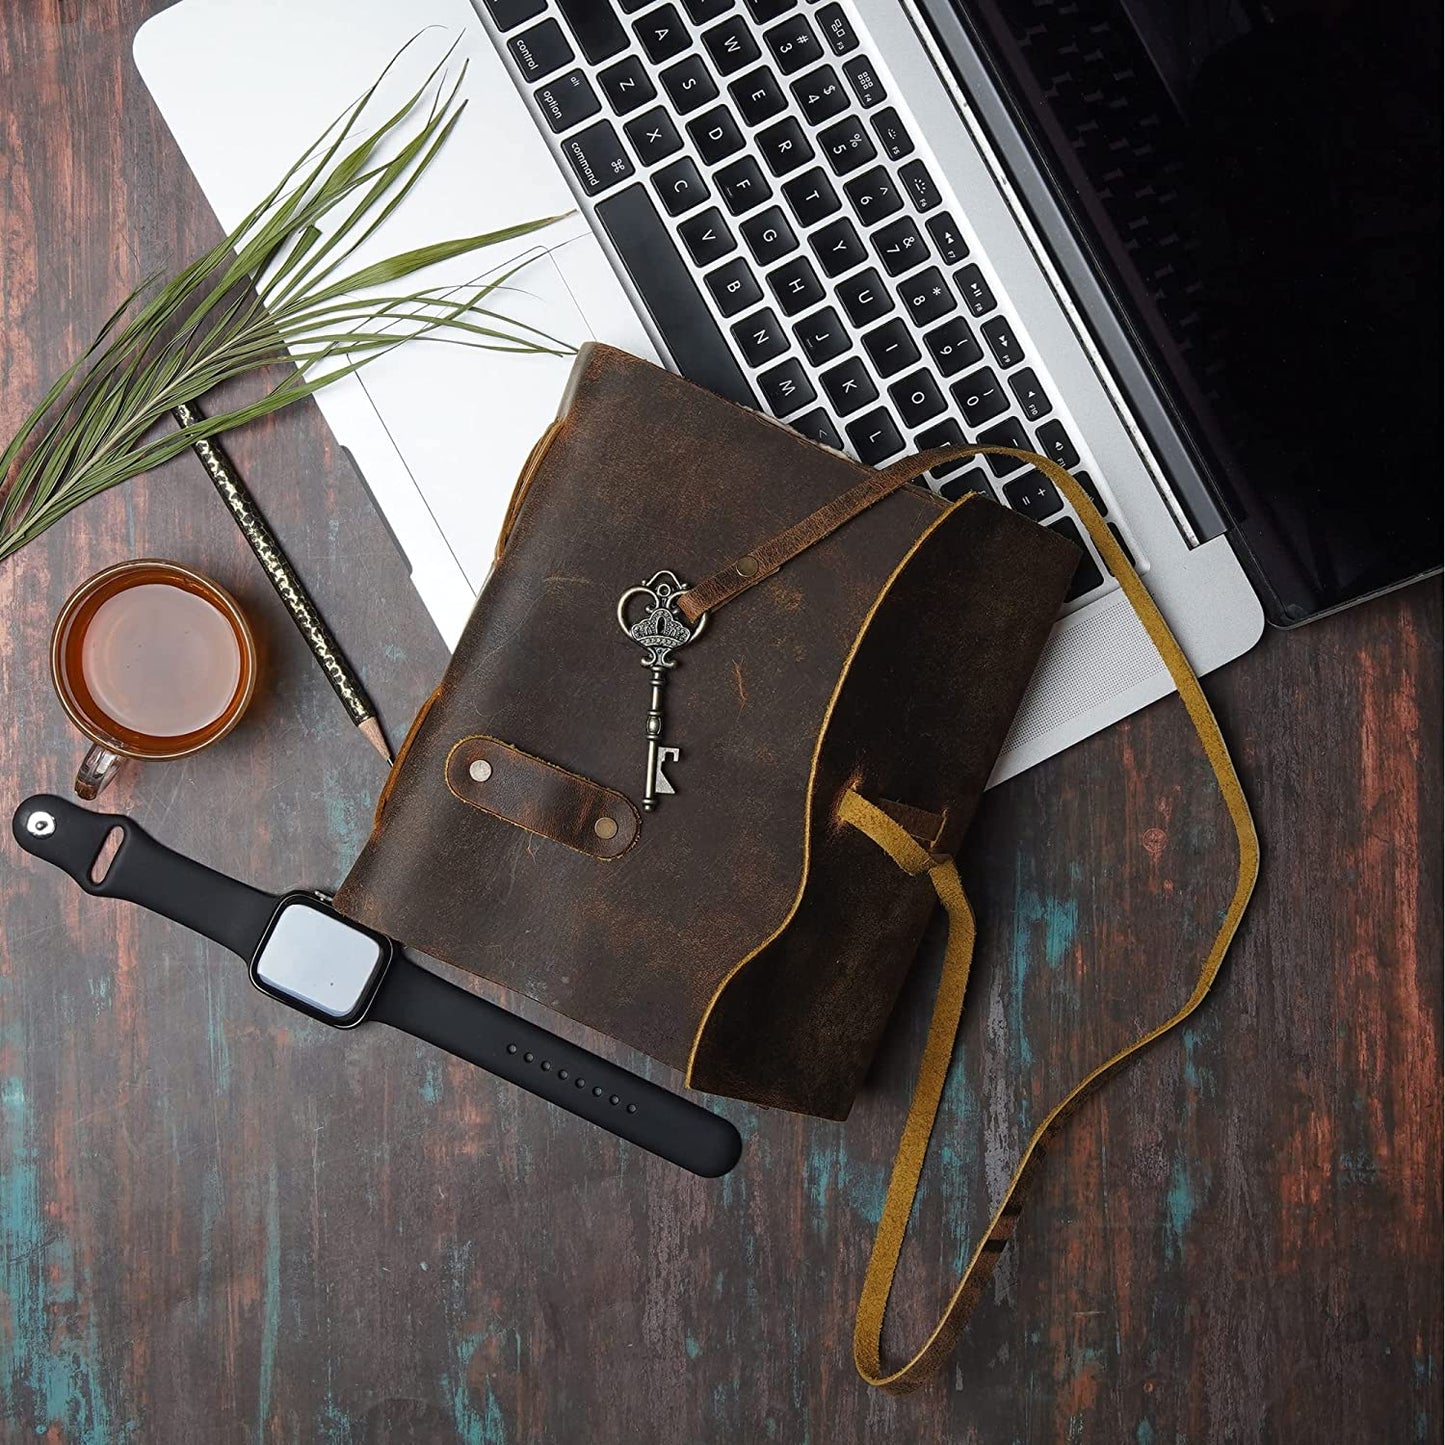 A brown leather vintage journal with key resting on a laptop.